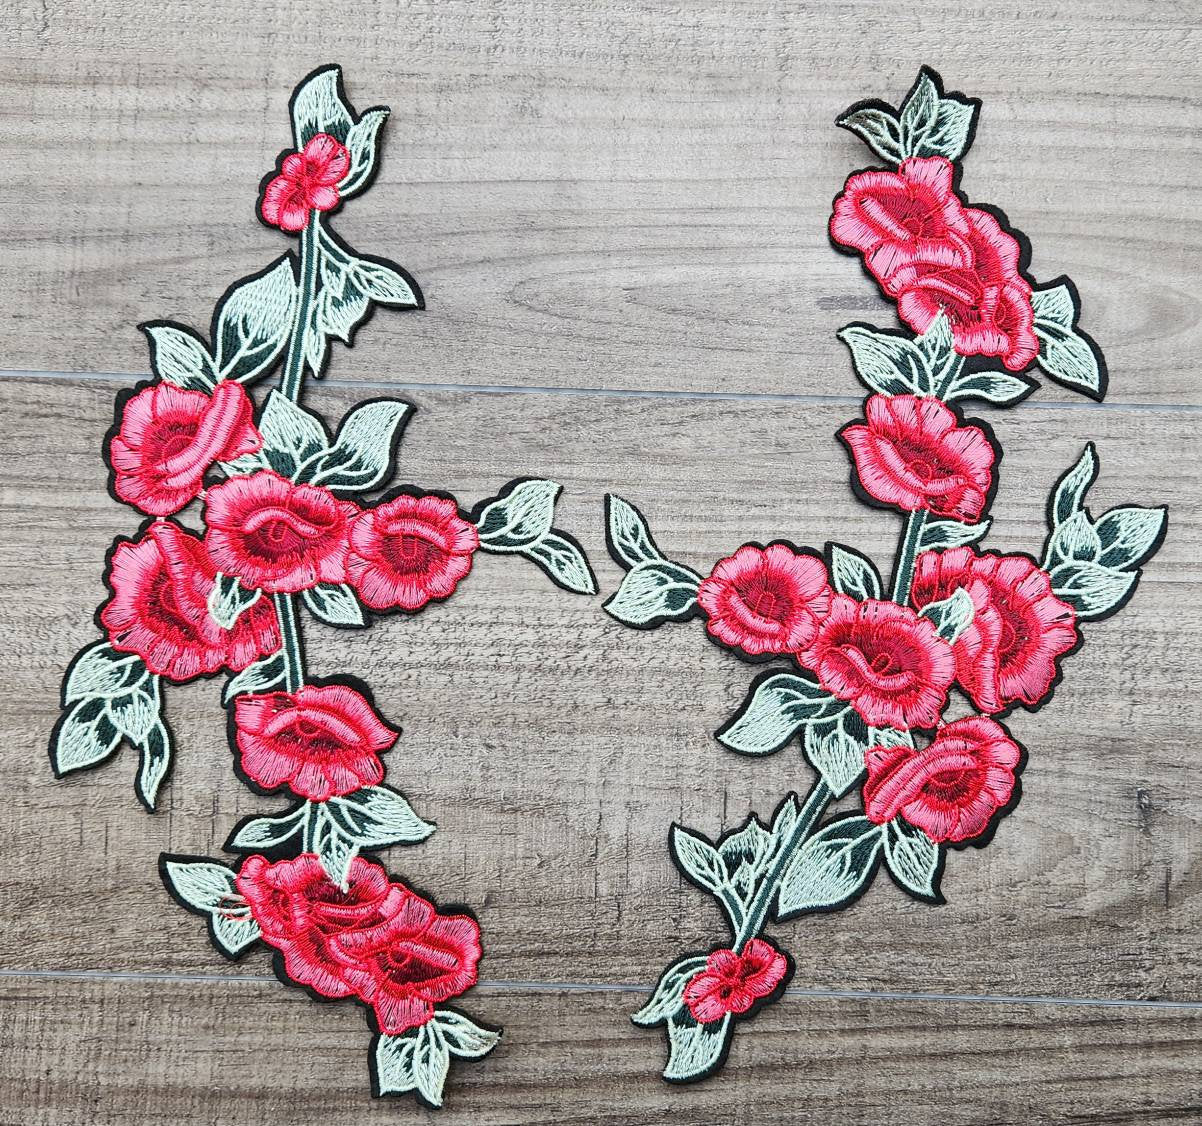 Beautiful 2-pc set, 11" Red Flowers w/Light Green Stem, Matching Floral Embroidered Patches Flower Patches for Clothing and Accessories